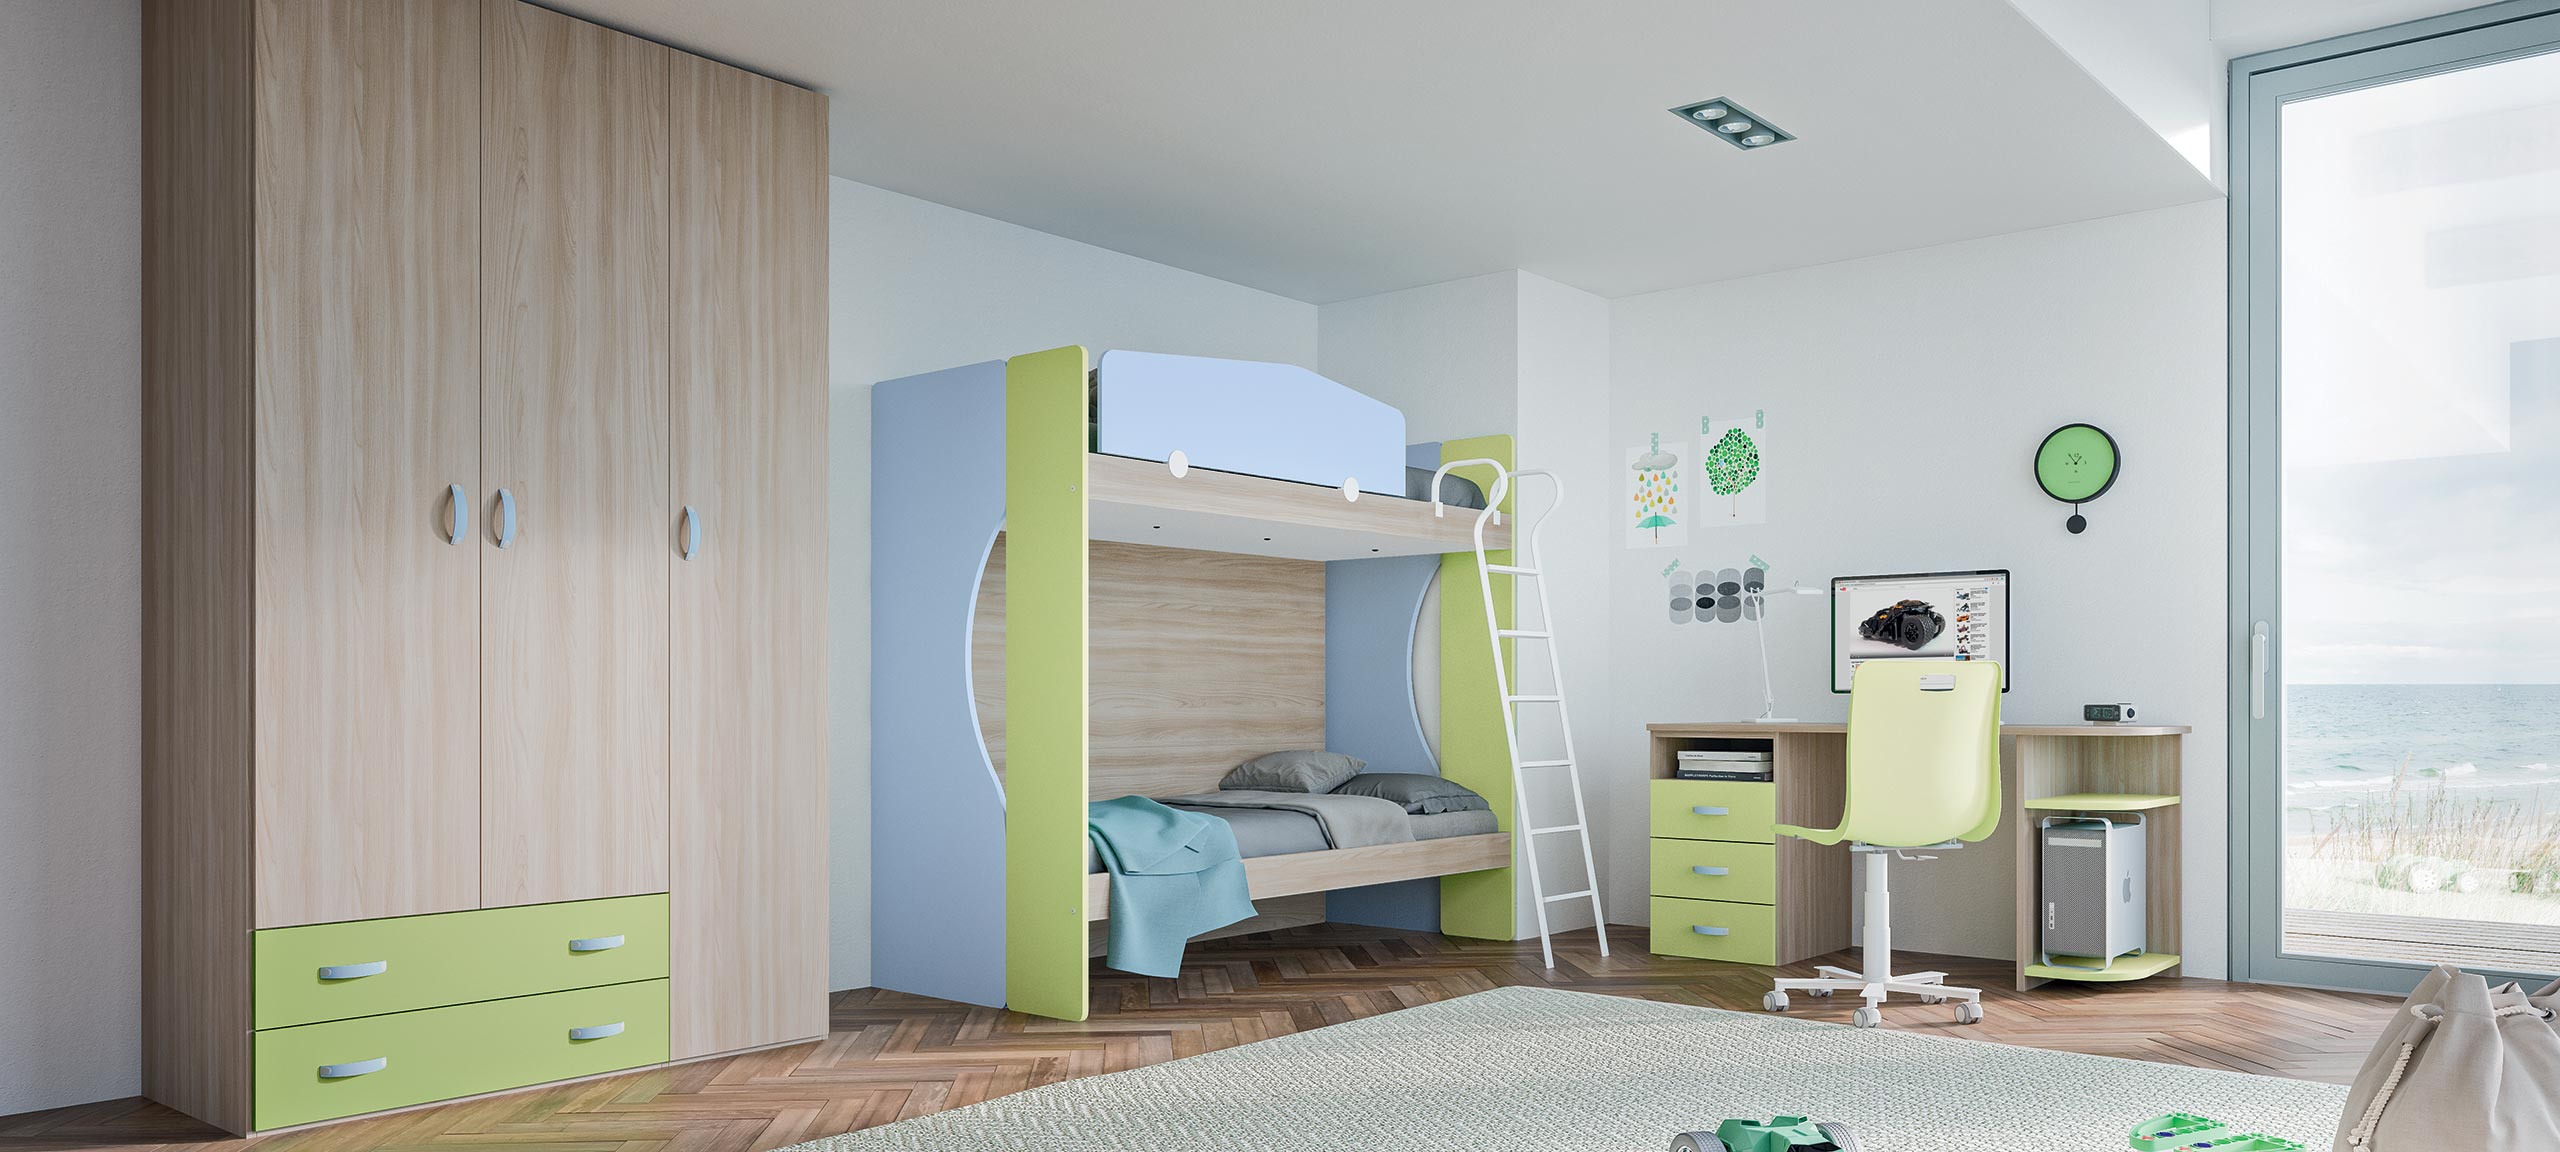 children's bedrooms with bunk beds and convertibles 4